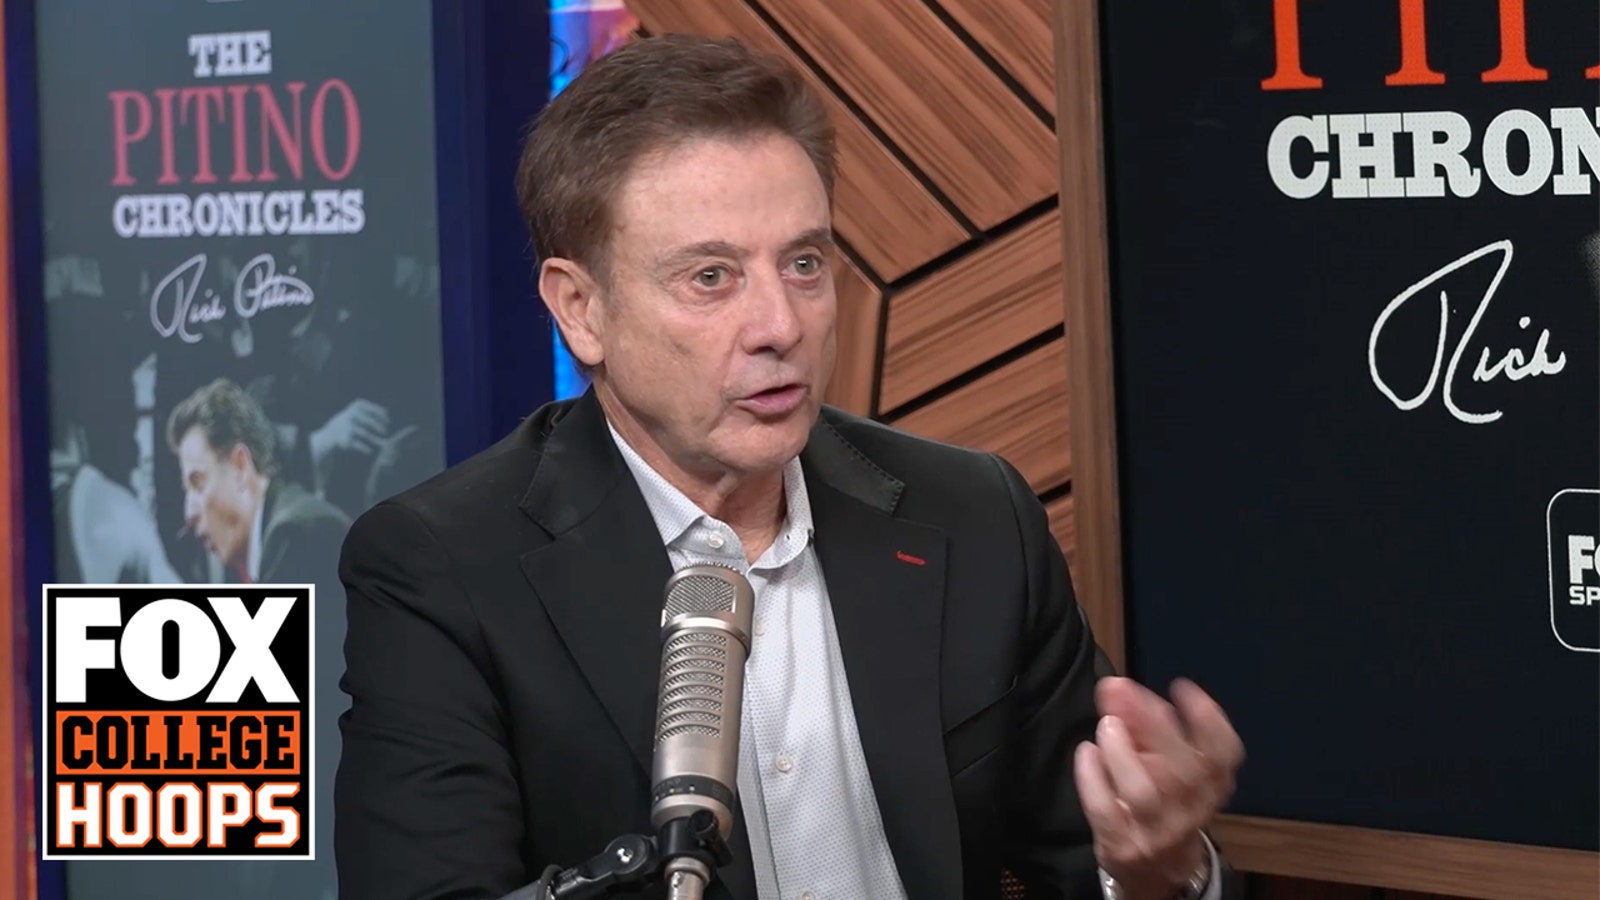 Pitino Chronicles: Rick Pitino speaks on NIL in College Basketball